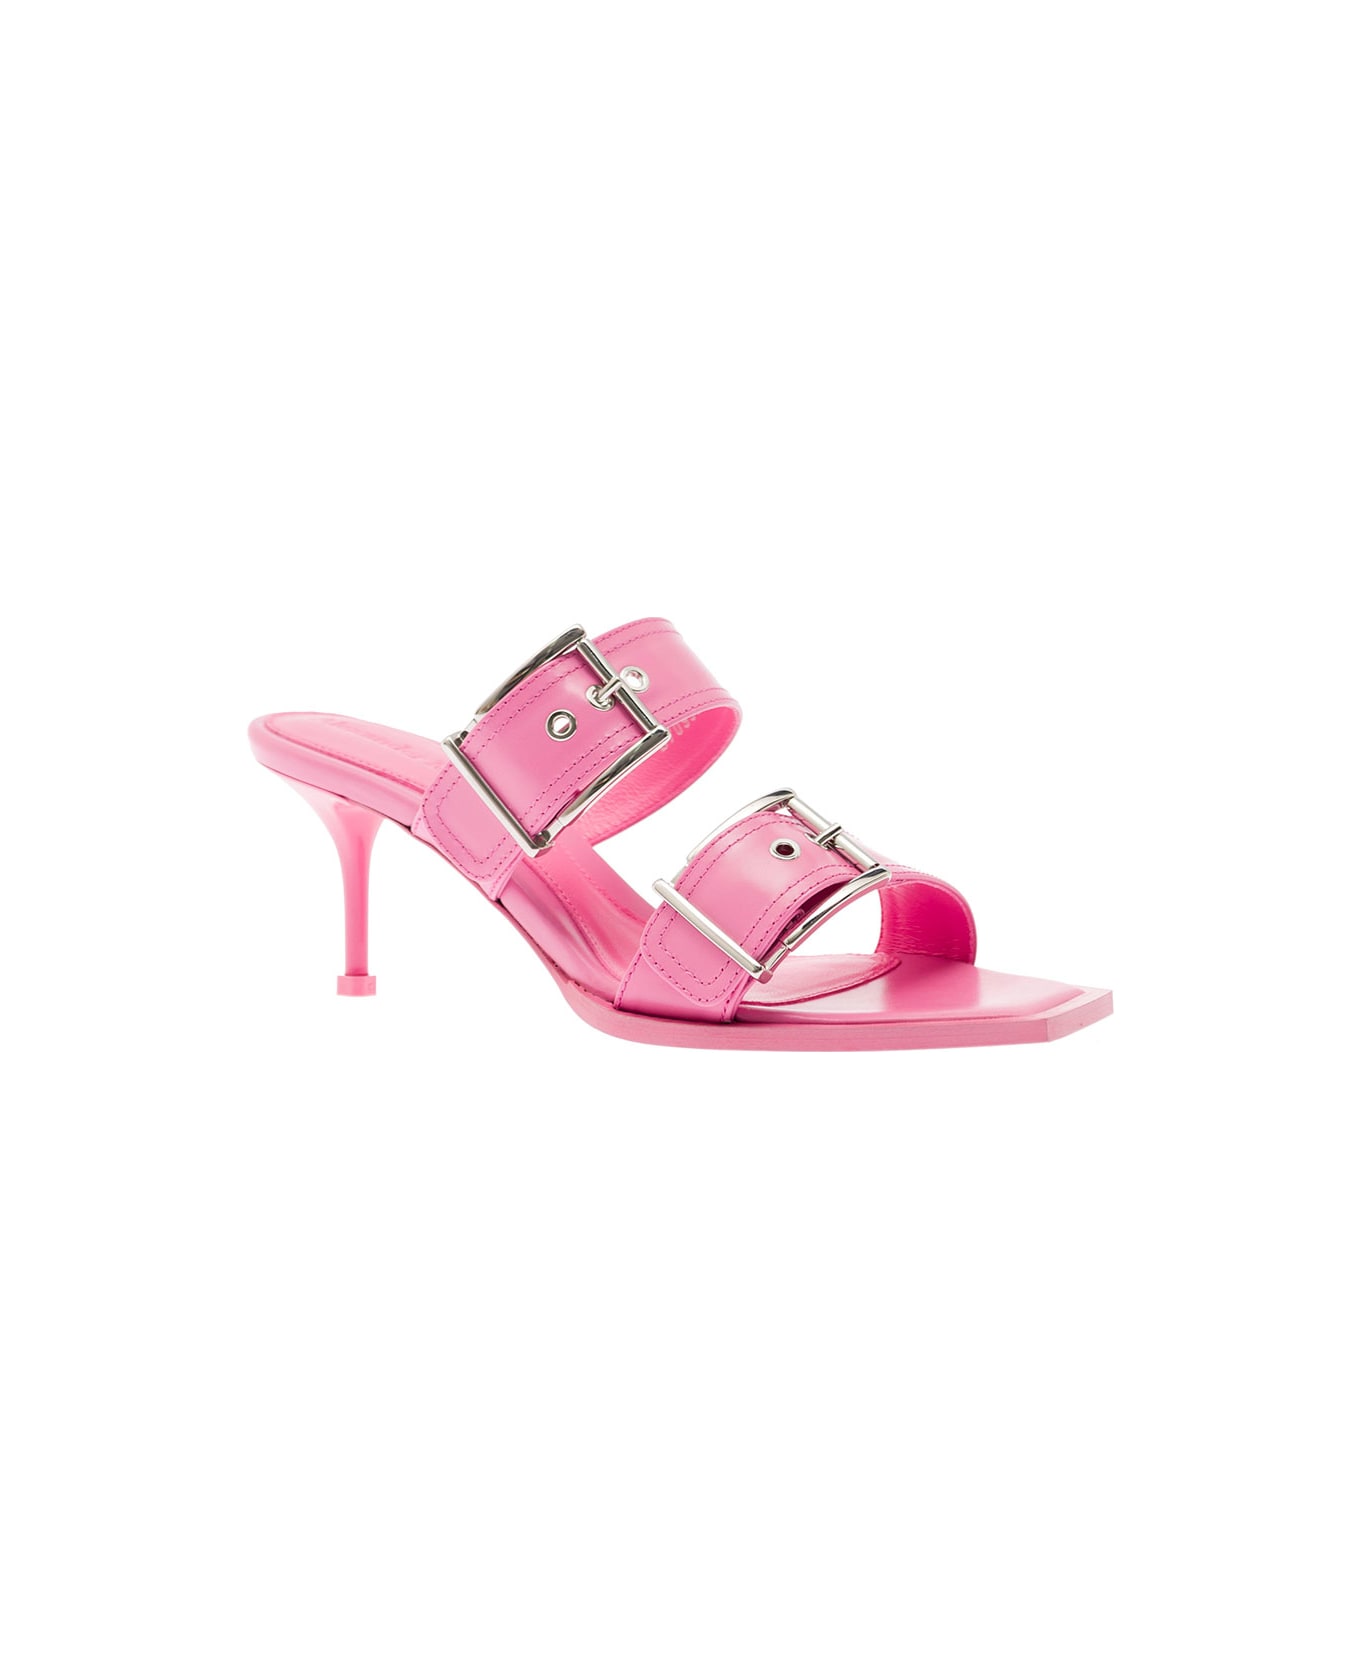 Alexander McQueen 'punk' Pink Sandals With Double Strap And Metal Buckles In Leather Woman - Pink